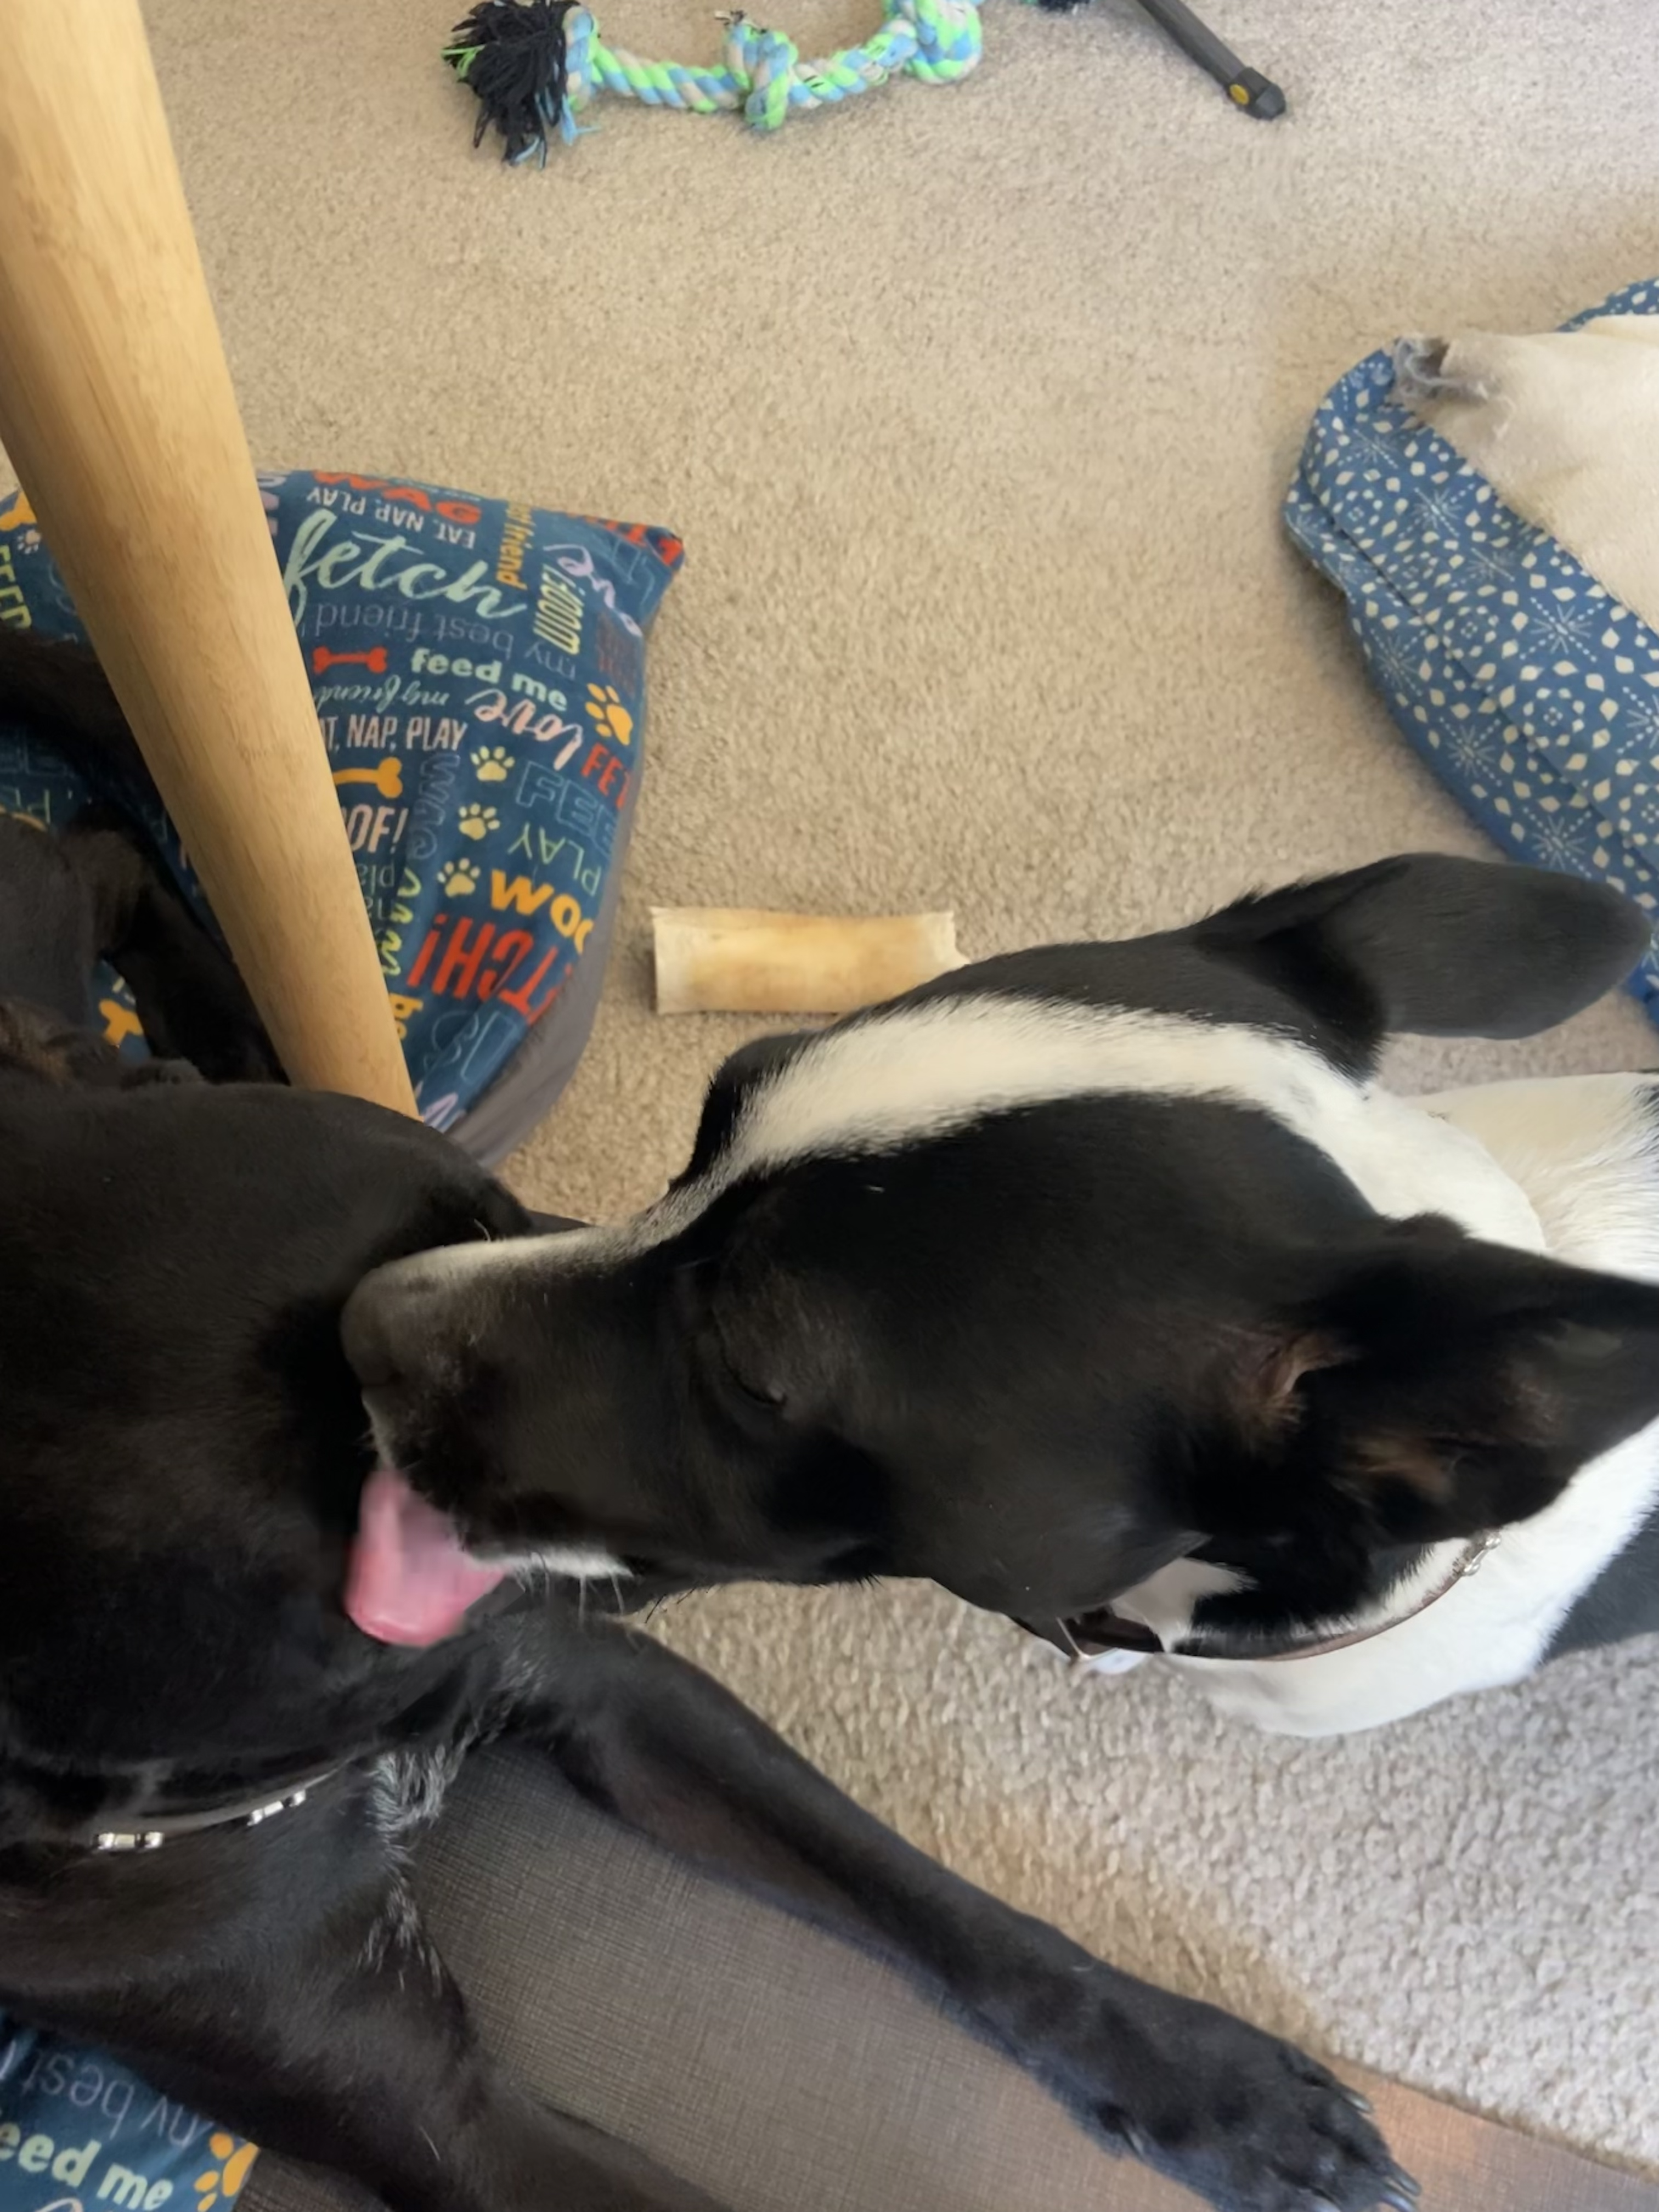 Two dogs, the shorter black and white dog is licking the larger dark dog on his head